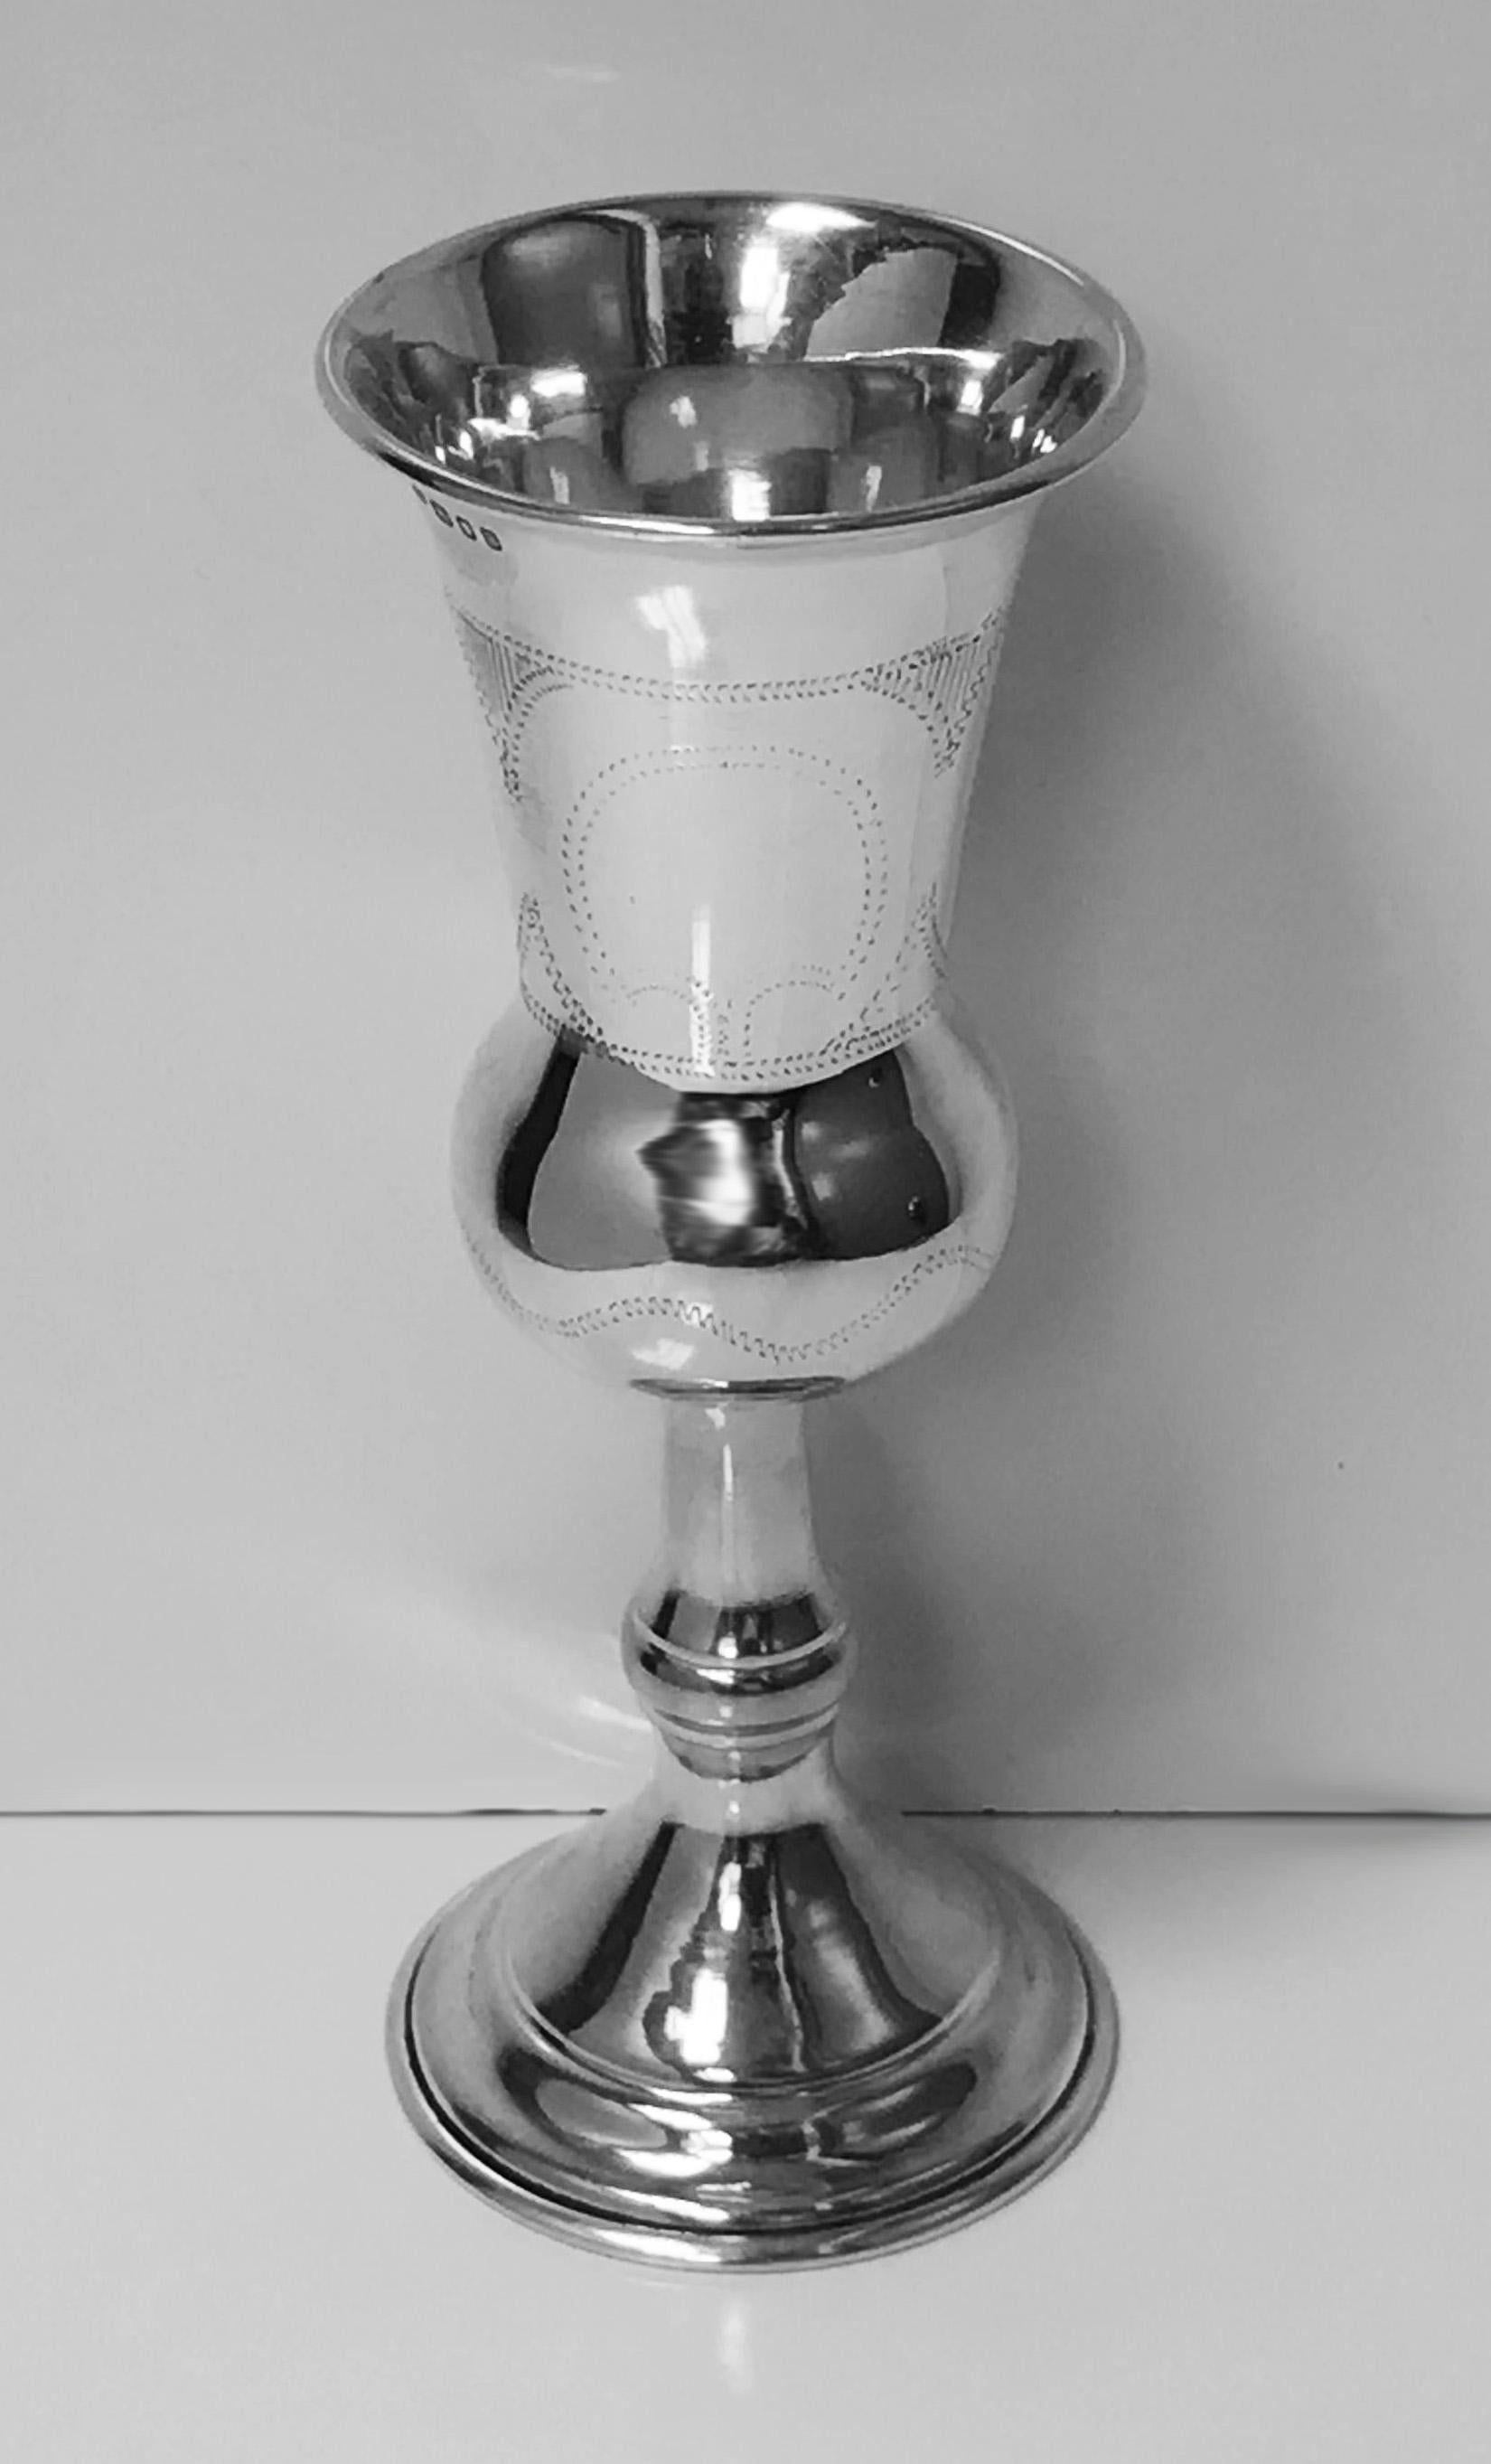 English sterling silver Kiddush cup goblet, London 1937, Morris Salkind. Campana shape on round dome circular pedestal foot, wriggle work pin prick engraved panels, one with vacant cartouche. Measure: Height 6.25 inches. Weight: 93.04 grams.